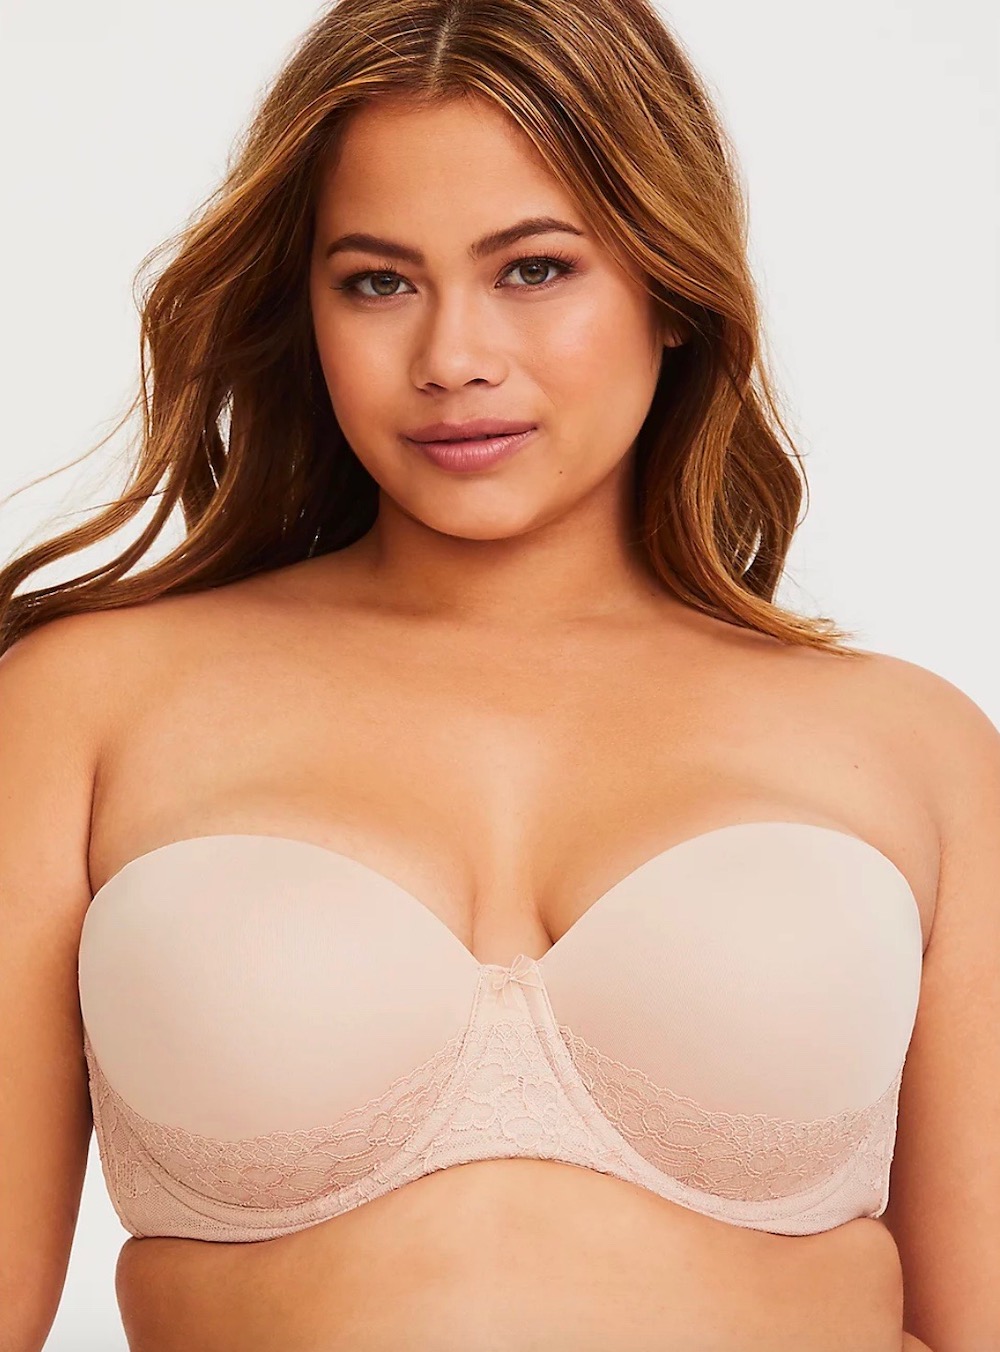 Best Strapless Bras for Bigger Busts - theFashionSpot